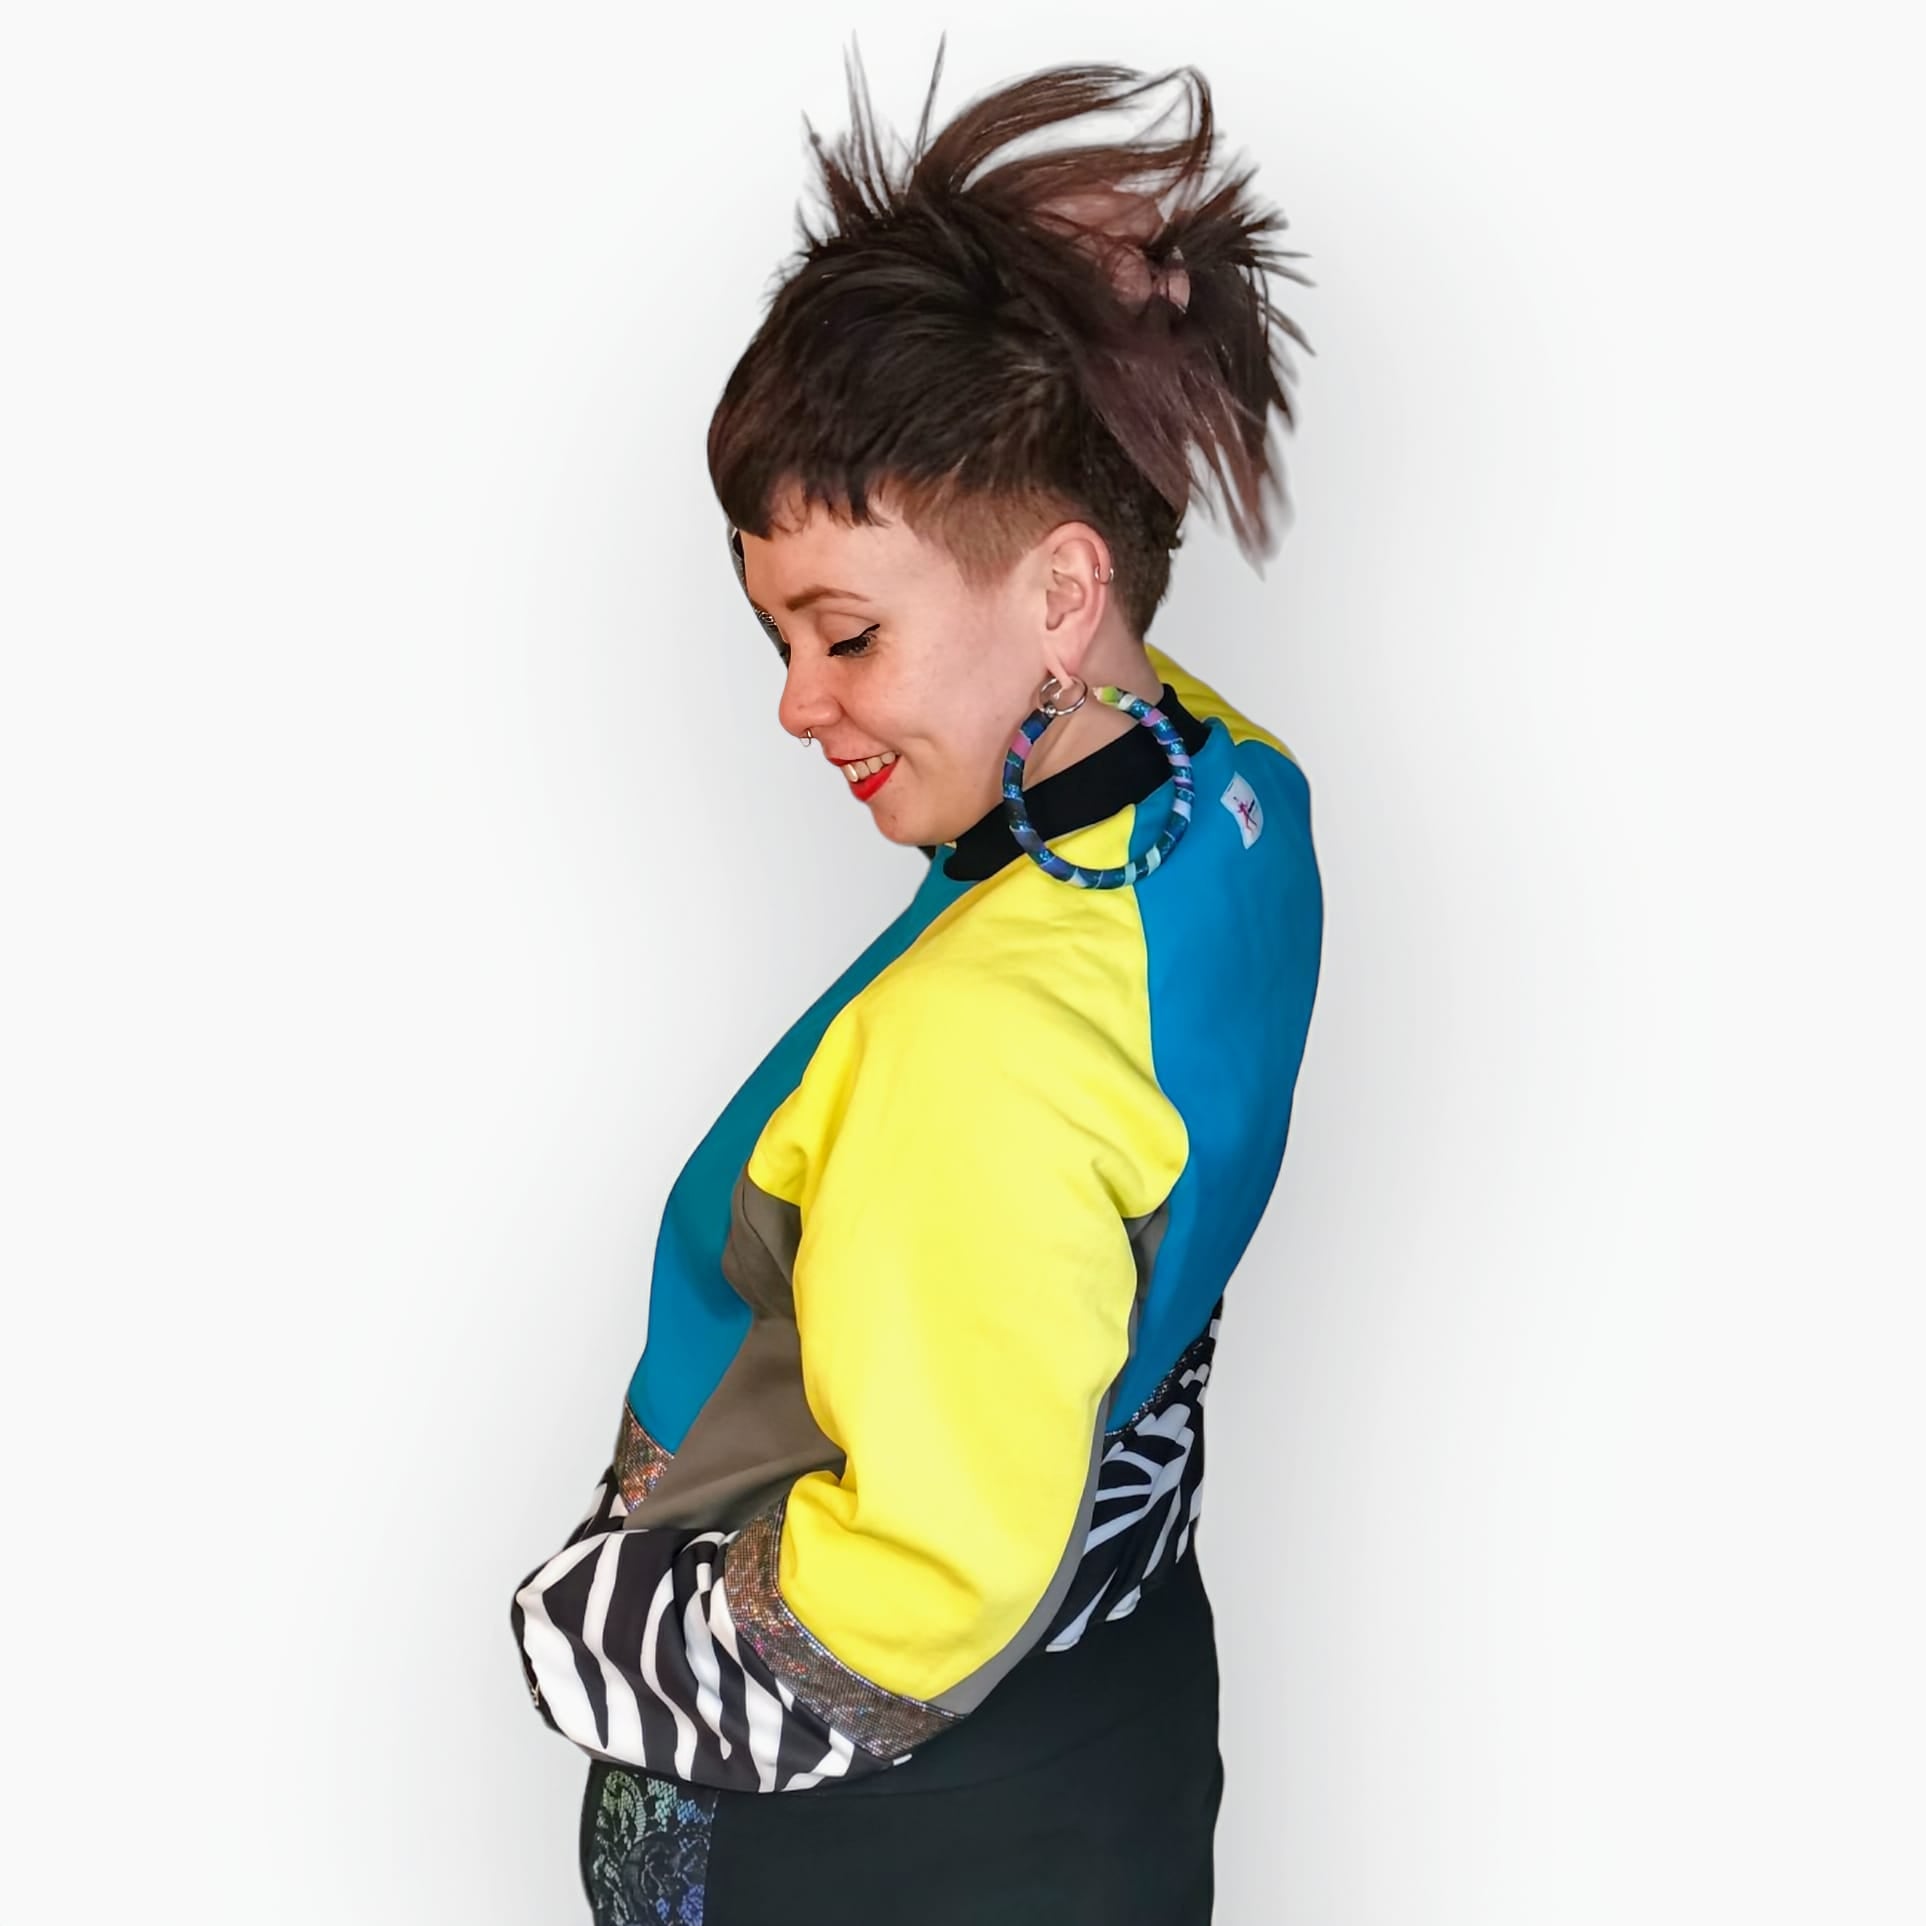 Model Hannah wears Blue Zebra Sweatshirt, a limited edition, off-the-peg piece in blue, yellow and grey sweatshirt fleece with black and white zebra print spandex details. The unisex design features a raglan sleeve, a large printed spandex front pouch pocket, matching upper arm panels, silver hologram foiled stripes and black rib cuffs, waistband and neck. They also wear MayHem fabric wrap large hoop earrings. Side view